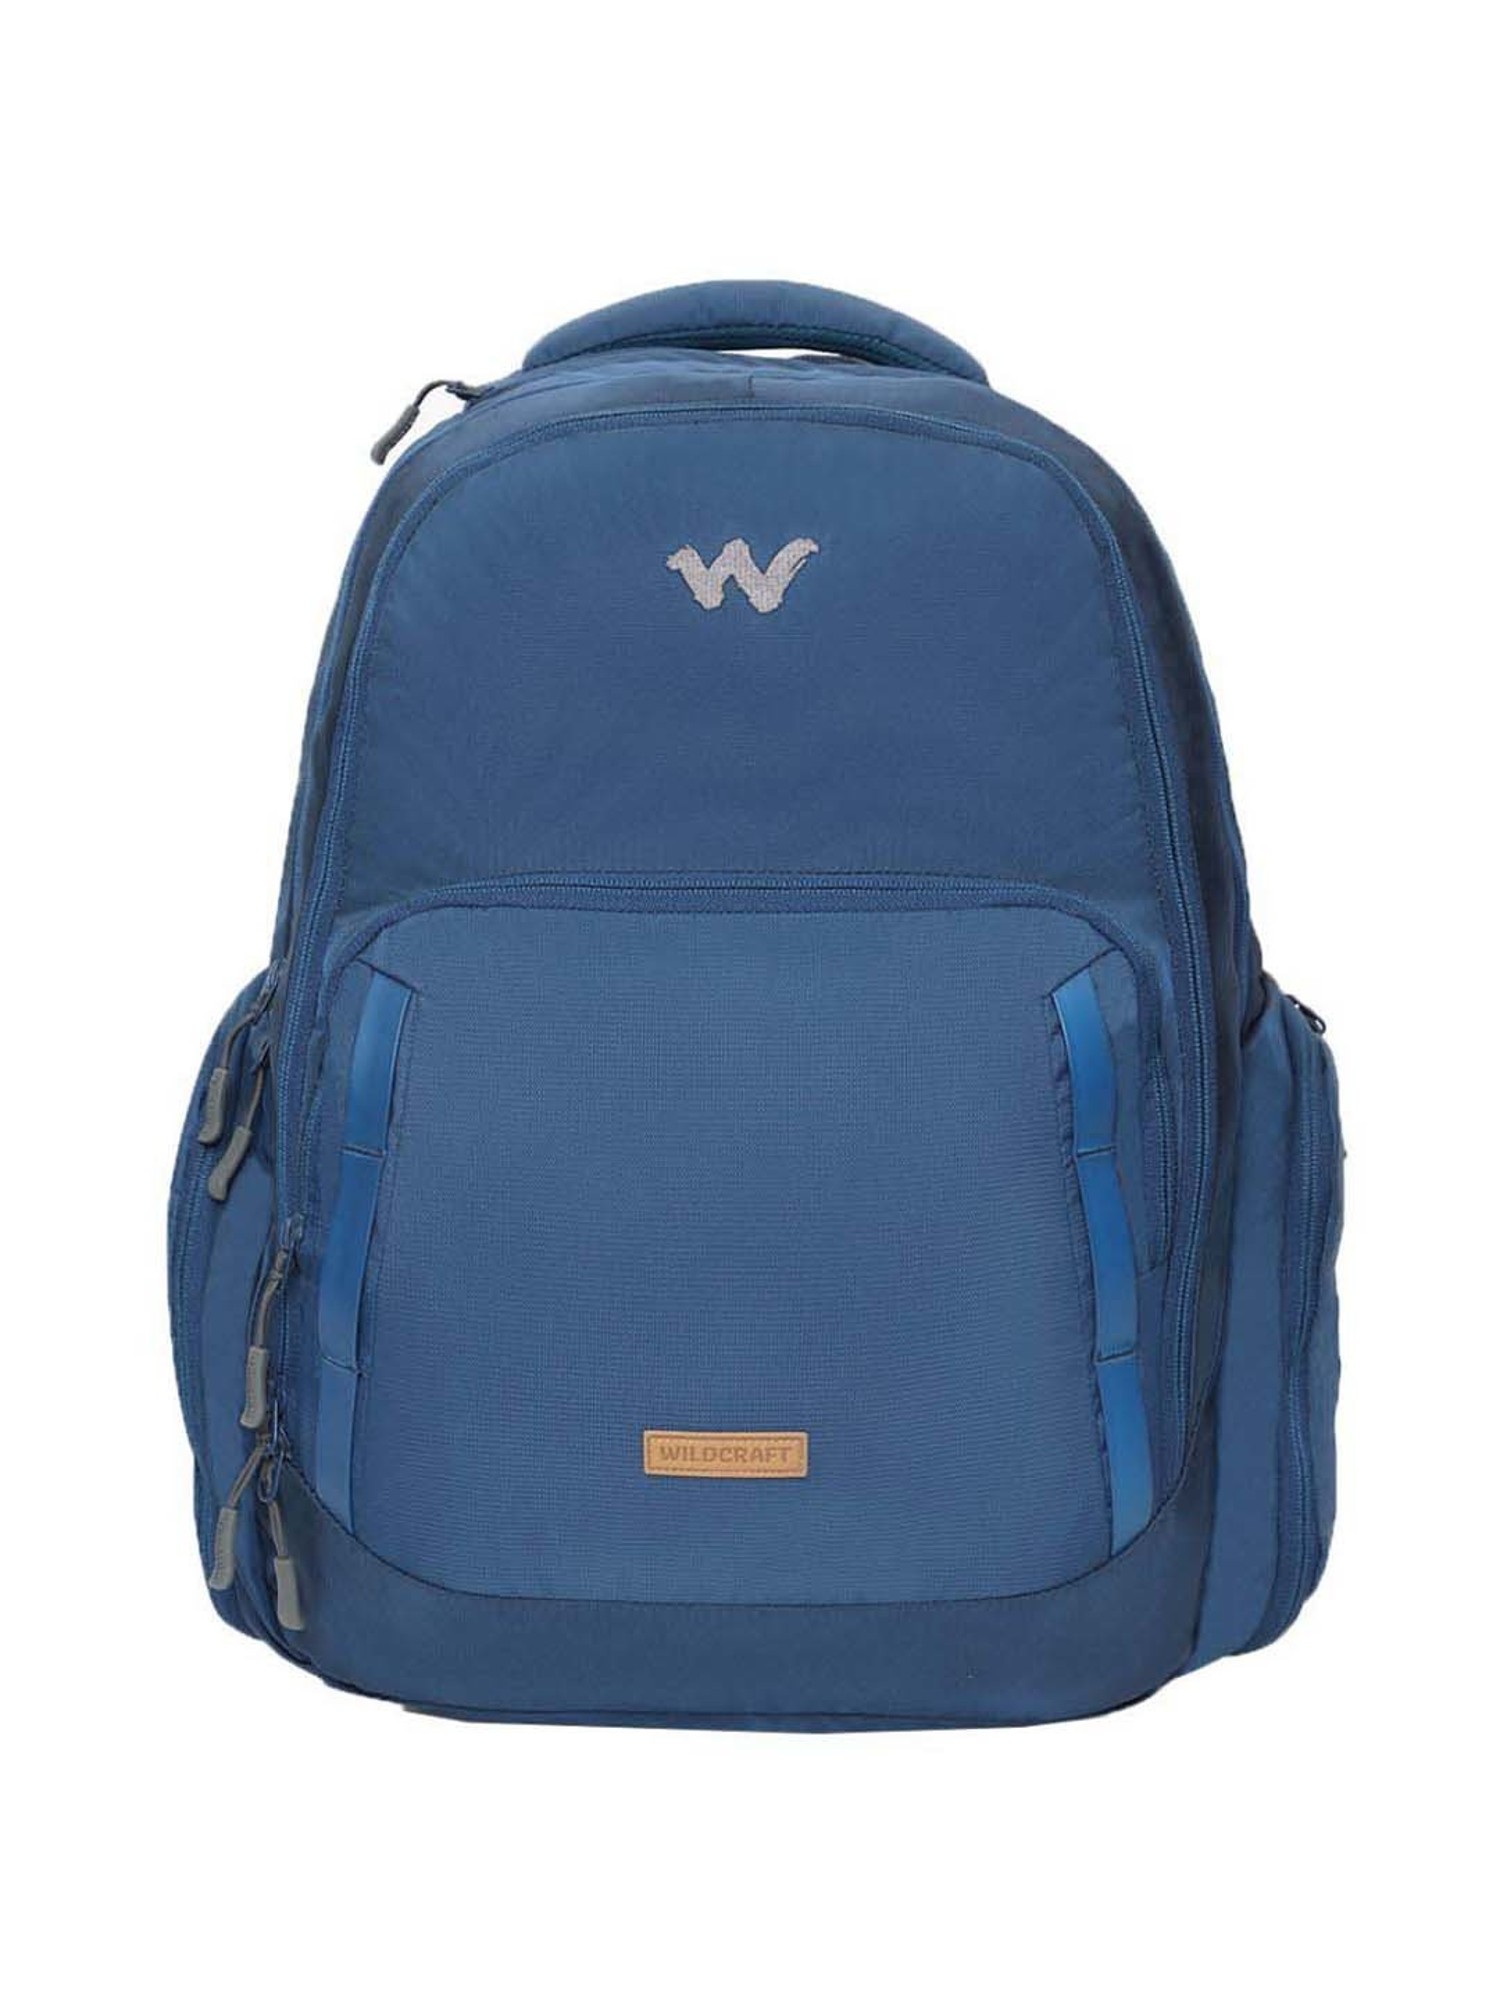 Plain Backpack Wildcraft Bag at Rs 950/bag in Chennai | ID: 20626577612